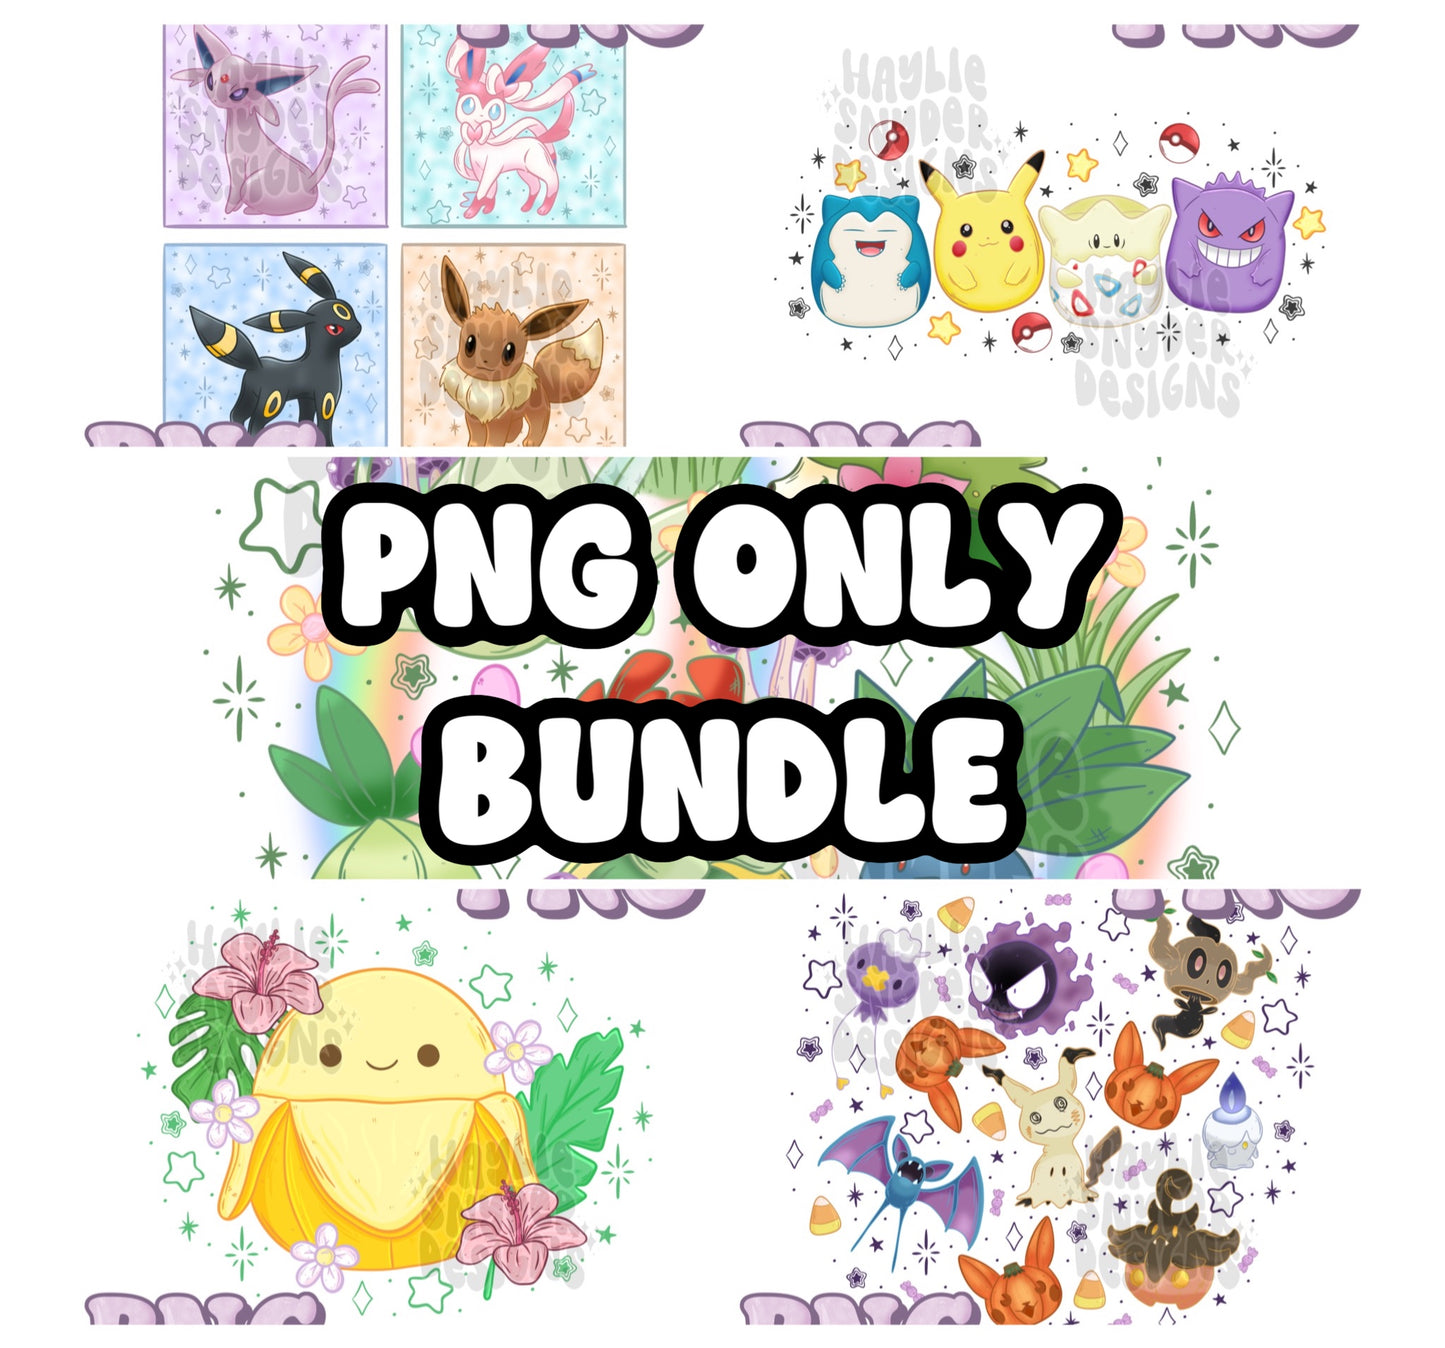 PNG ONLY BUNDLE